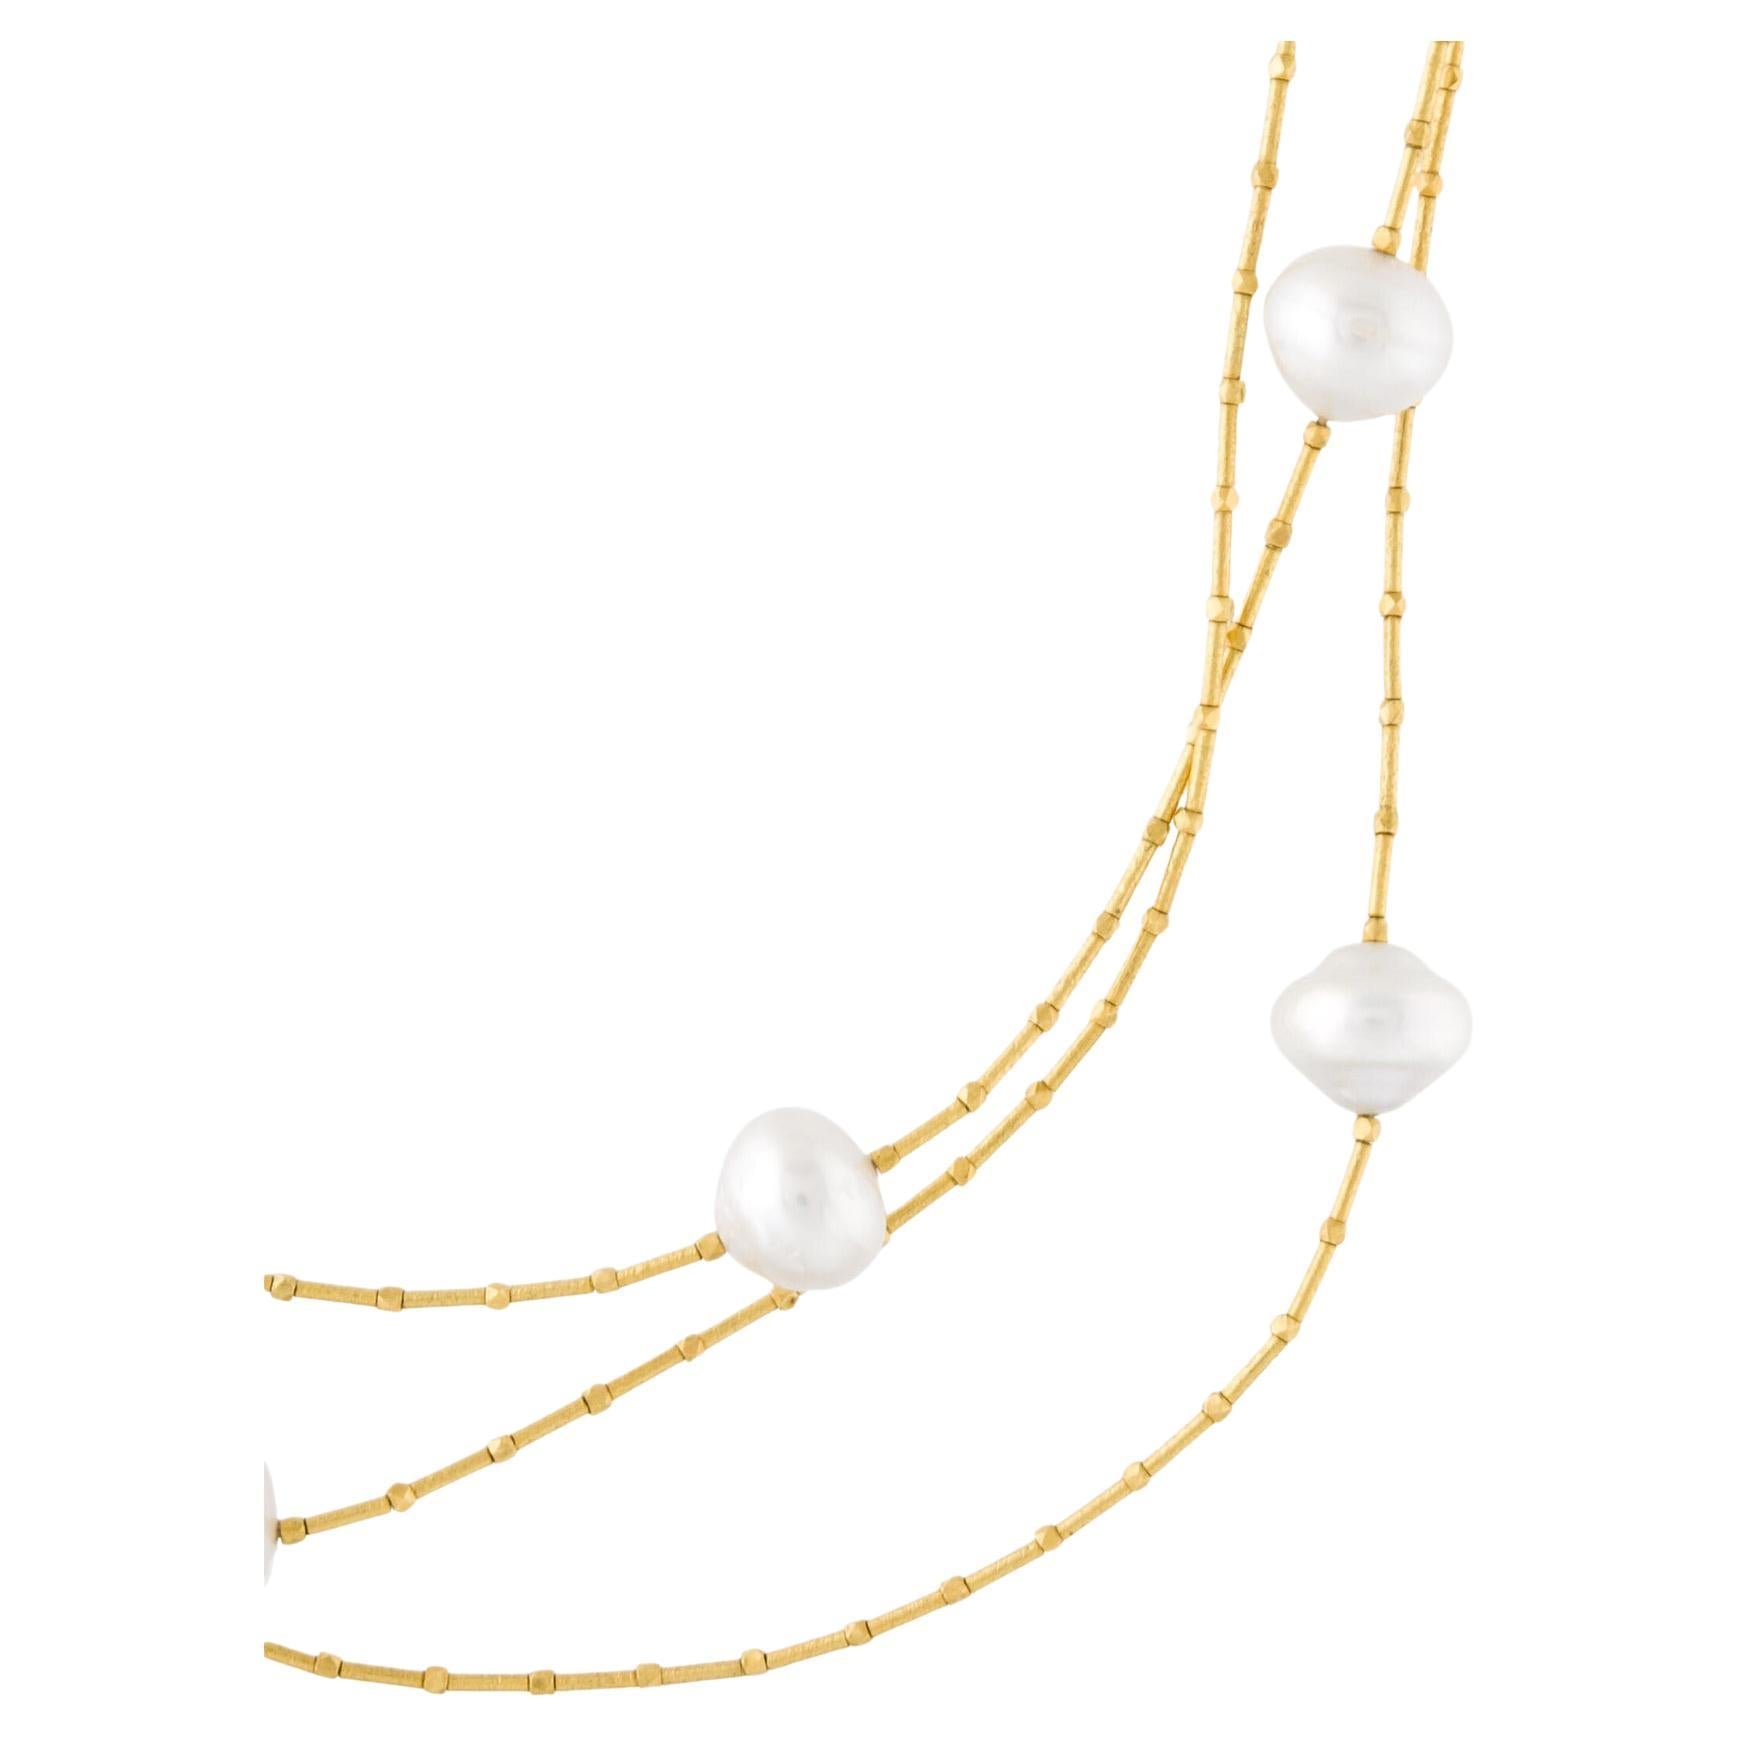 Art Deco 22 Karat Yellow Gold White Baroque Cultured Pearls with Hook Closure Necklace